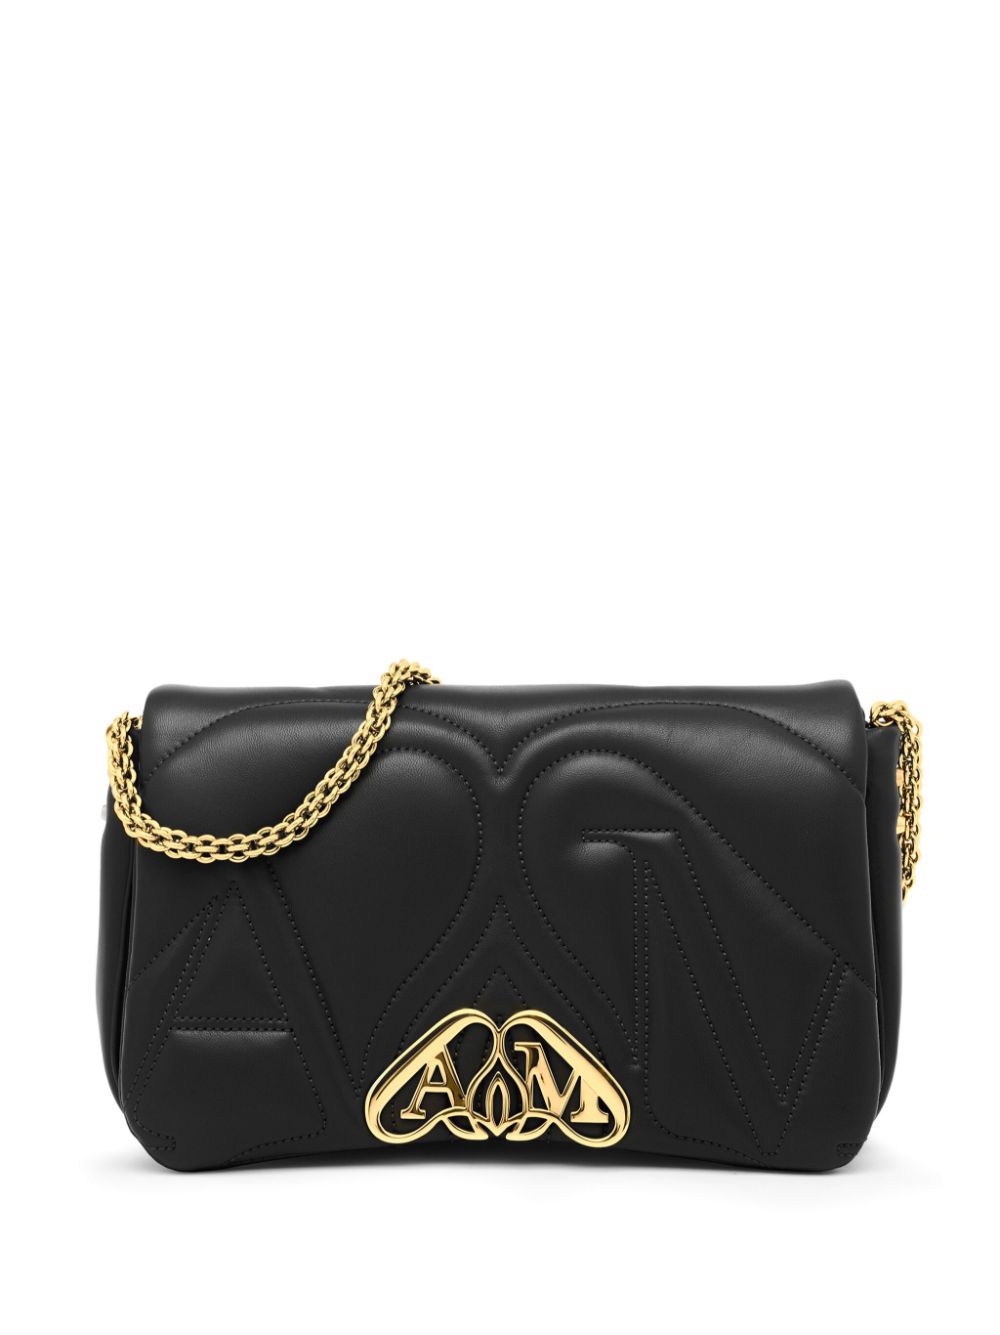 ALEXANDER MCQUEEN Mini Quilted Lambskin Leather Crossbody Bag with Gold-Tone Logo - Black